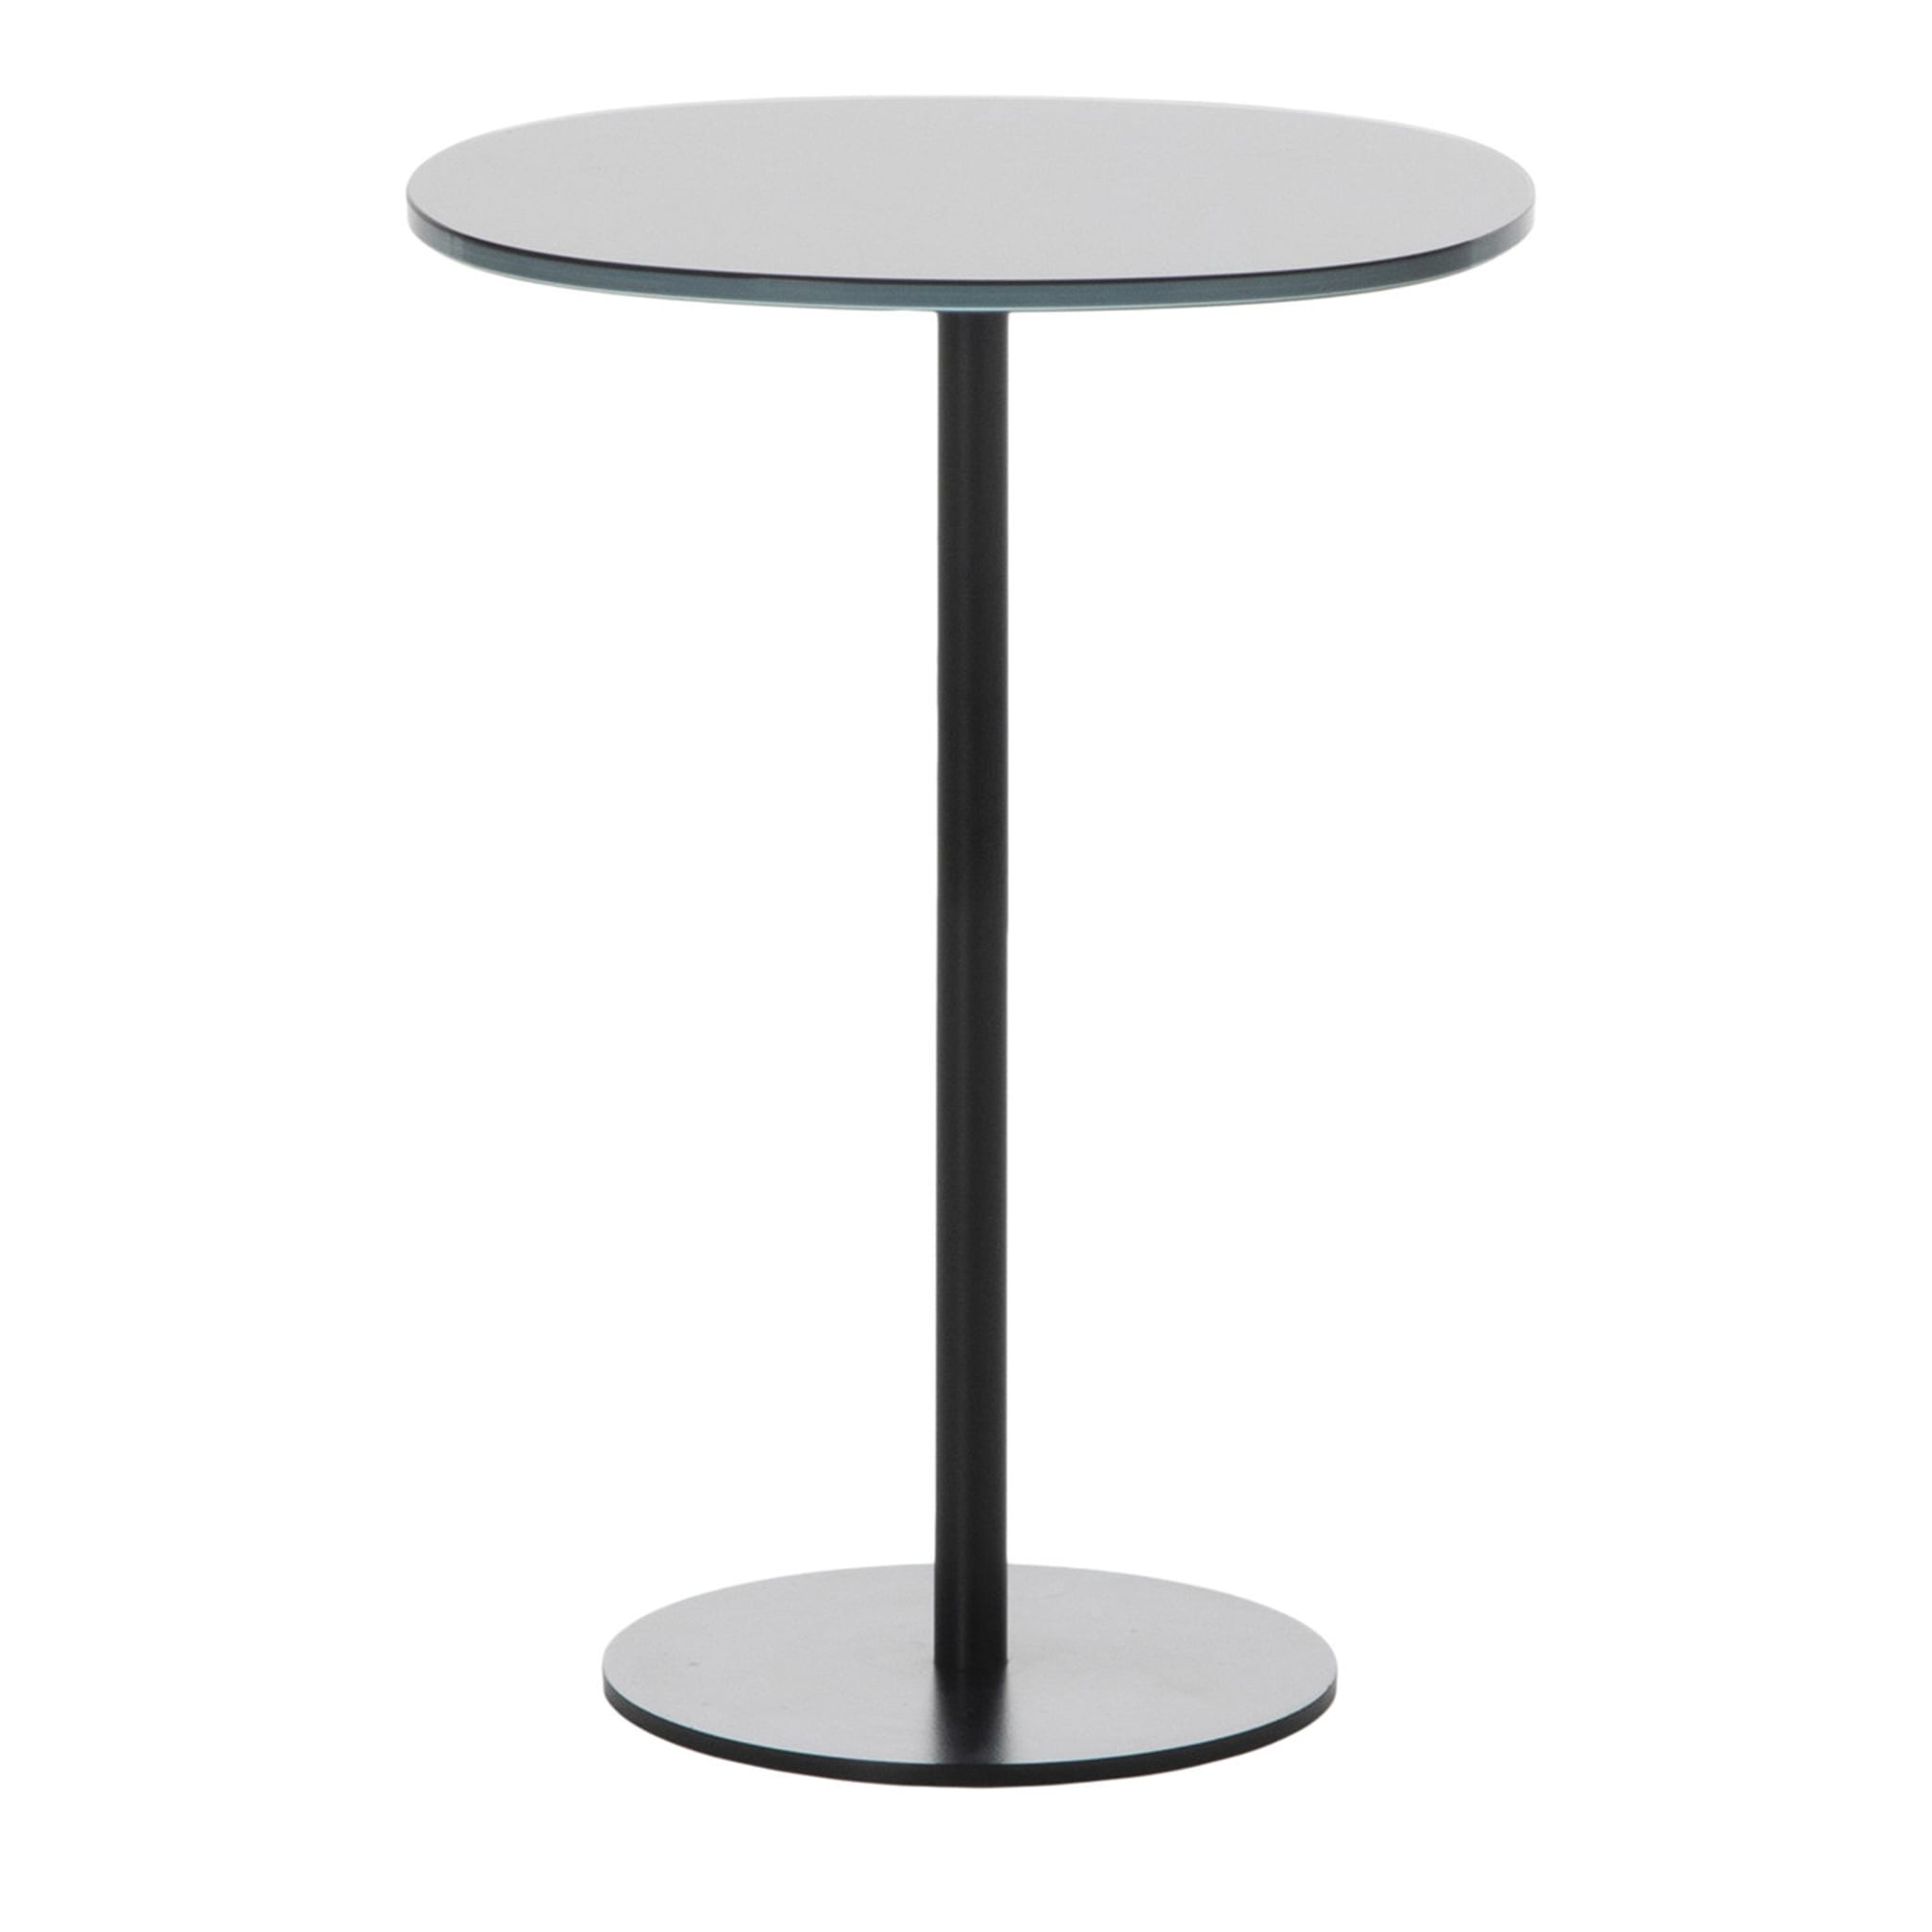 Solenoide Black Tall Side Table by Piero Lissoni - Main view